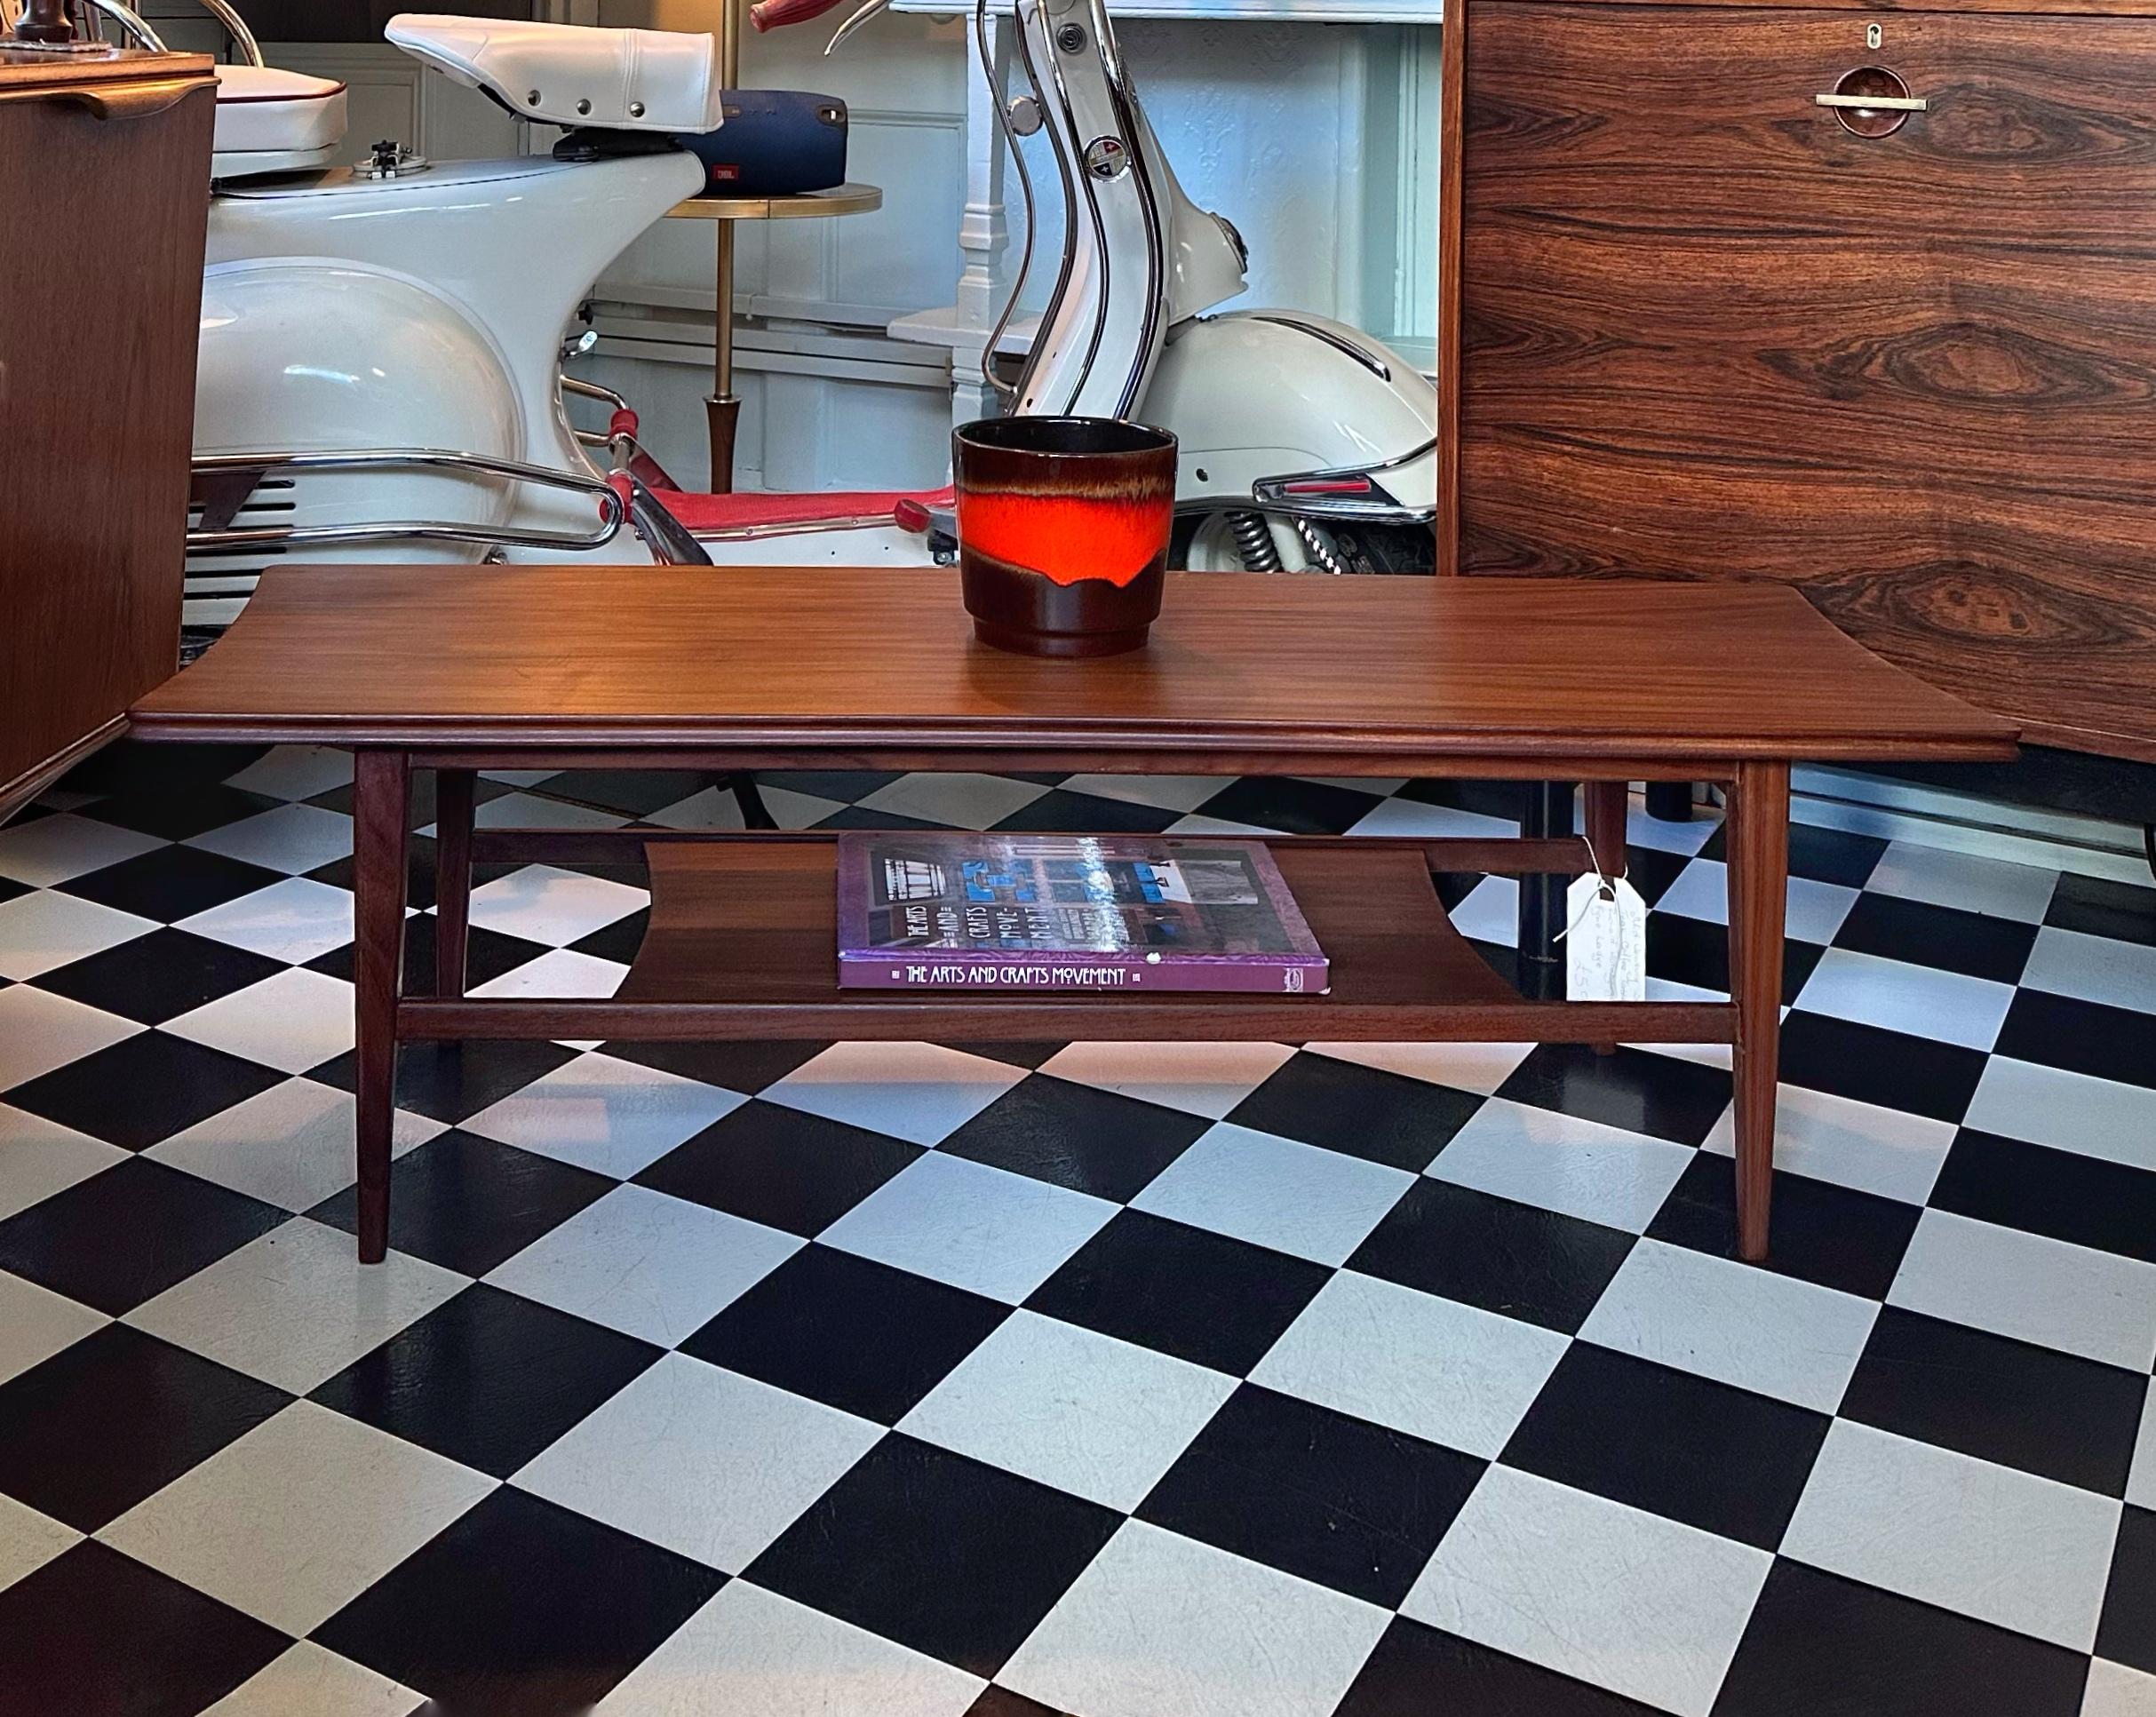 We’re happy to provide our own competitive shipping quotes with trusted couriers. Please message us with your postcode for a more accurate price. Thank you.

Very rare mid-century solid teak coffee table with magazine shelf by Richard Hornby for